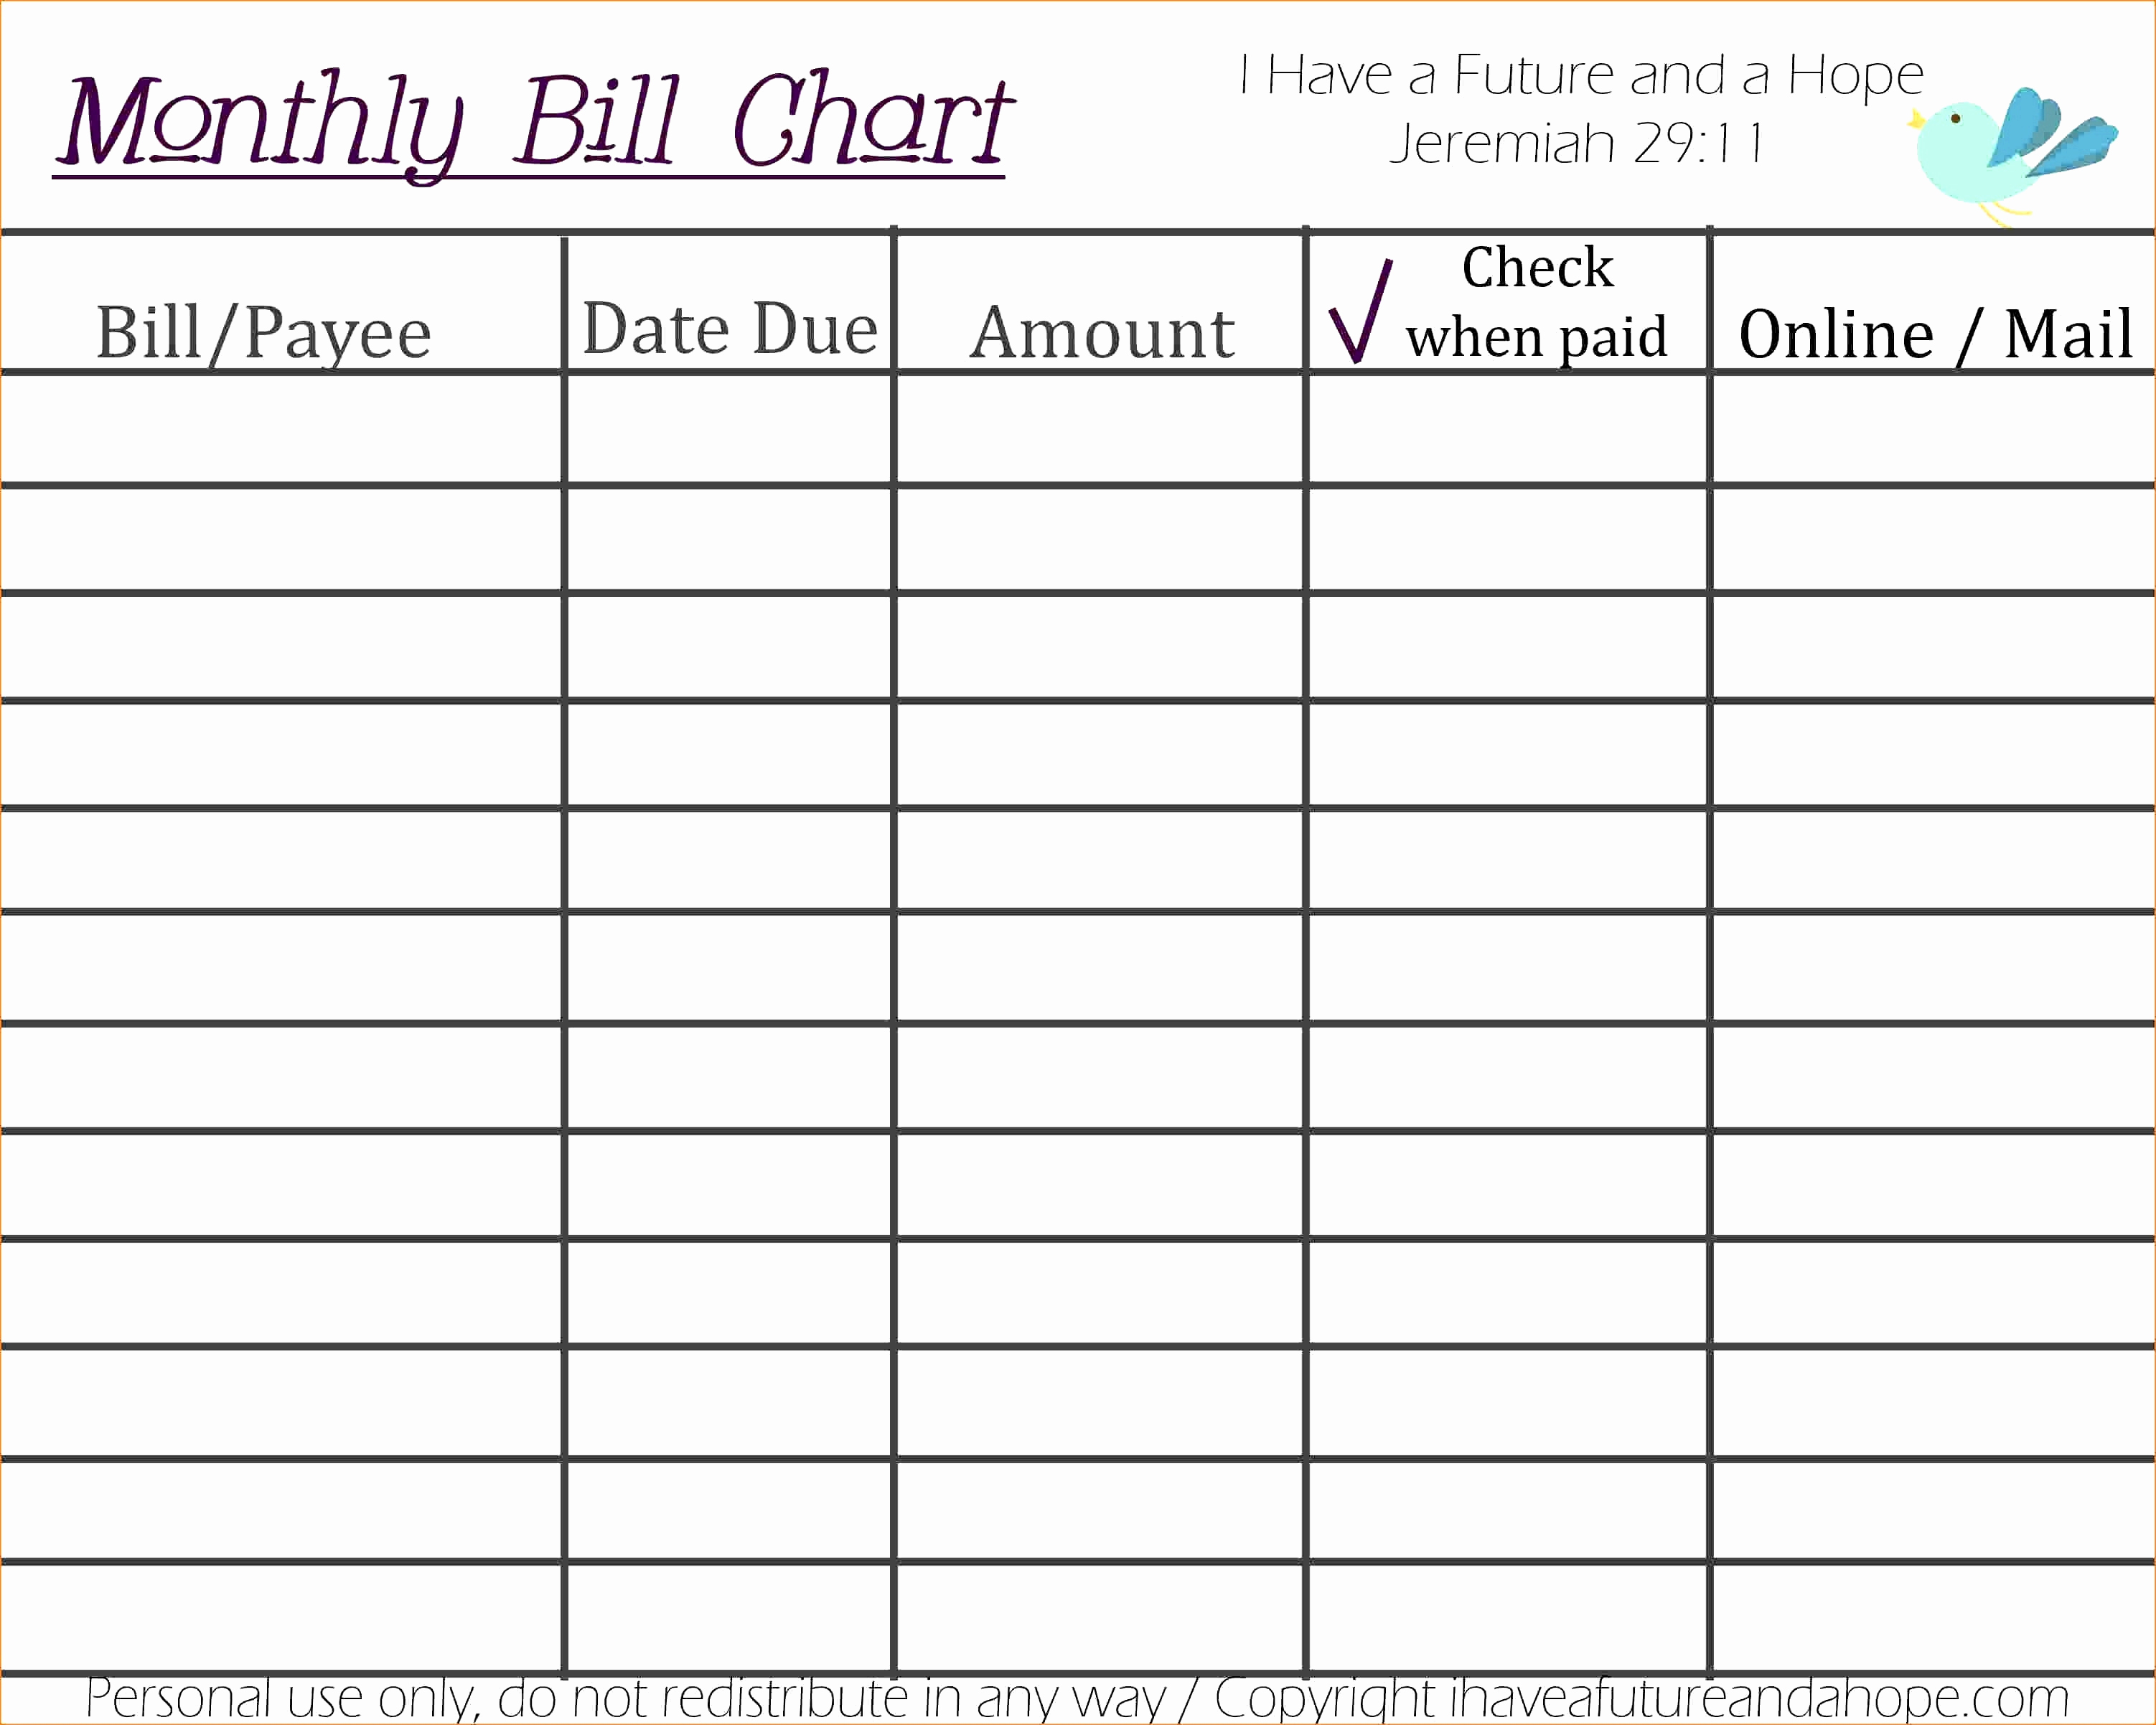 Free Tithes And Offering Spreadsheet New Free Tithes And Fering throughout Church Tithe And Offering Spreadsheet